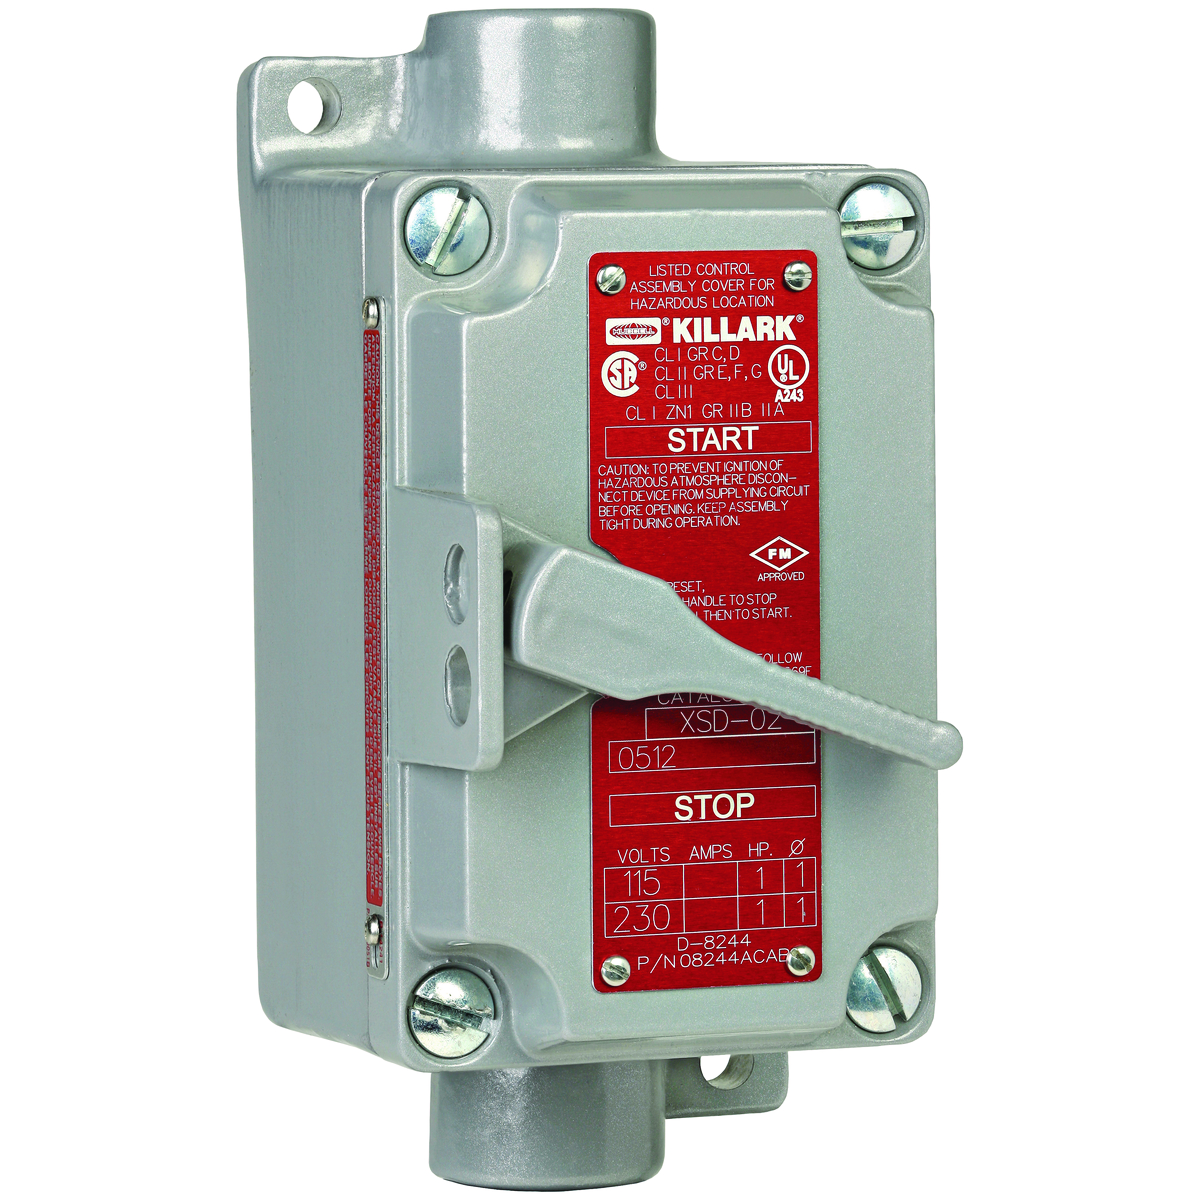 XSD SERIES - ALUMINUM DEAD-END SINGLE GANG 2-POLE, SINGLE PHASE MANUALMOTOR STARTING SWITCH UNIT - WITH OVERLOAD PROTECTION - HUB SIZE 3/4INCH